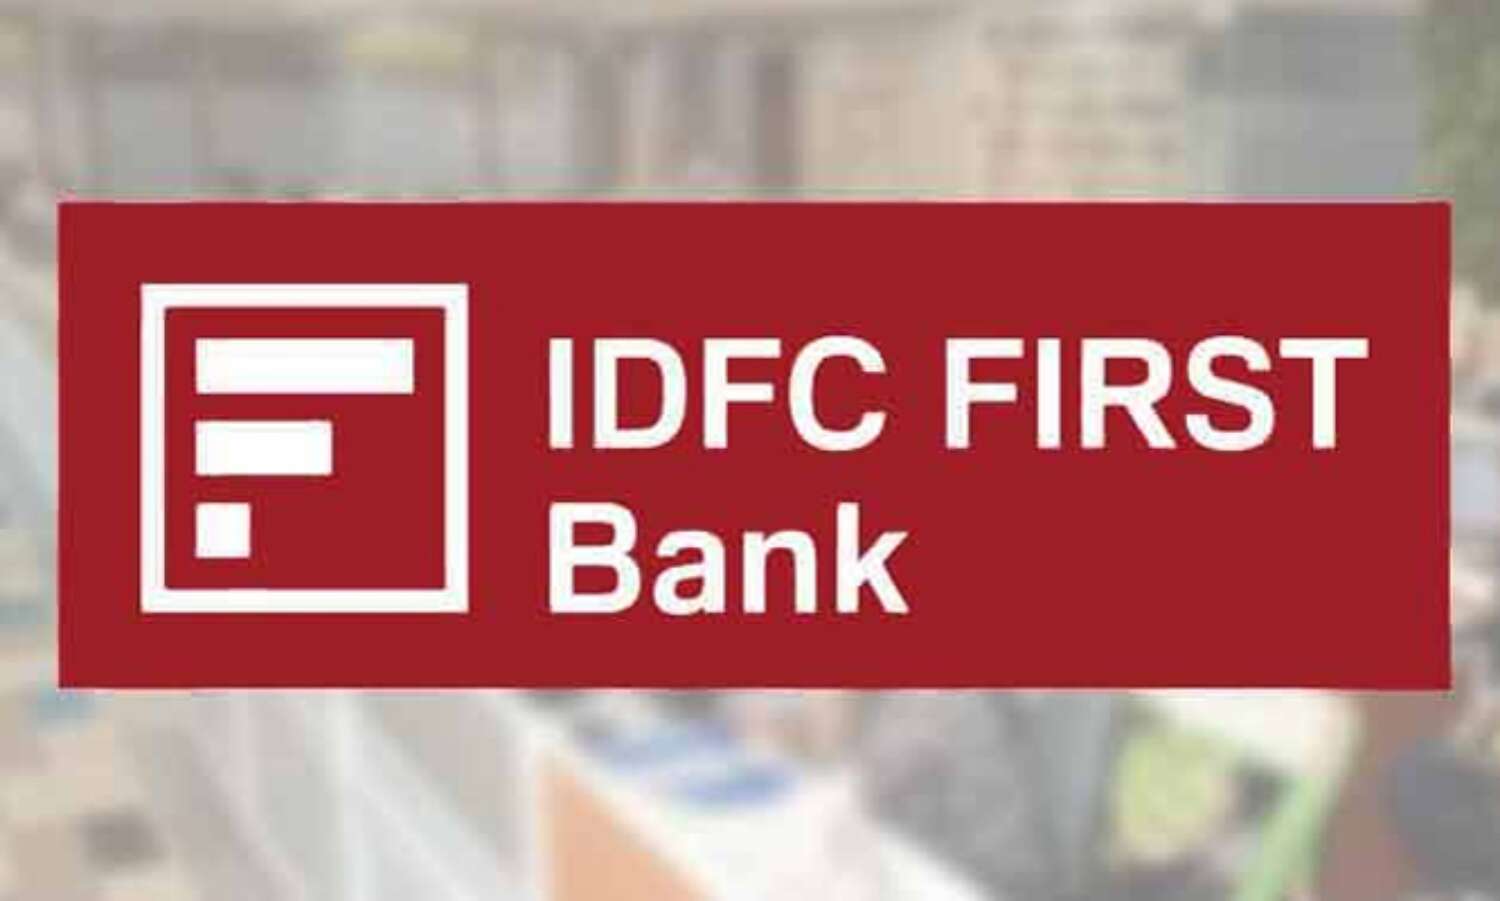 Niva Bupa partnered with IDFC FIRST Bank partner for Bancassurance